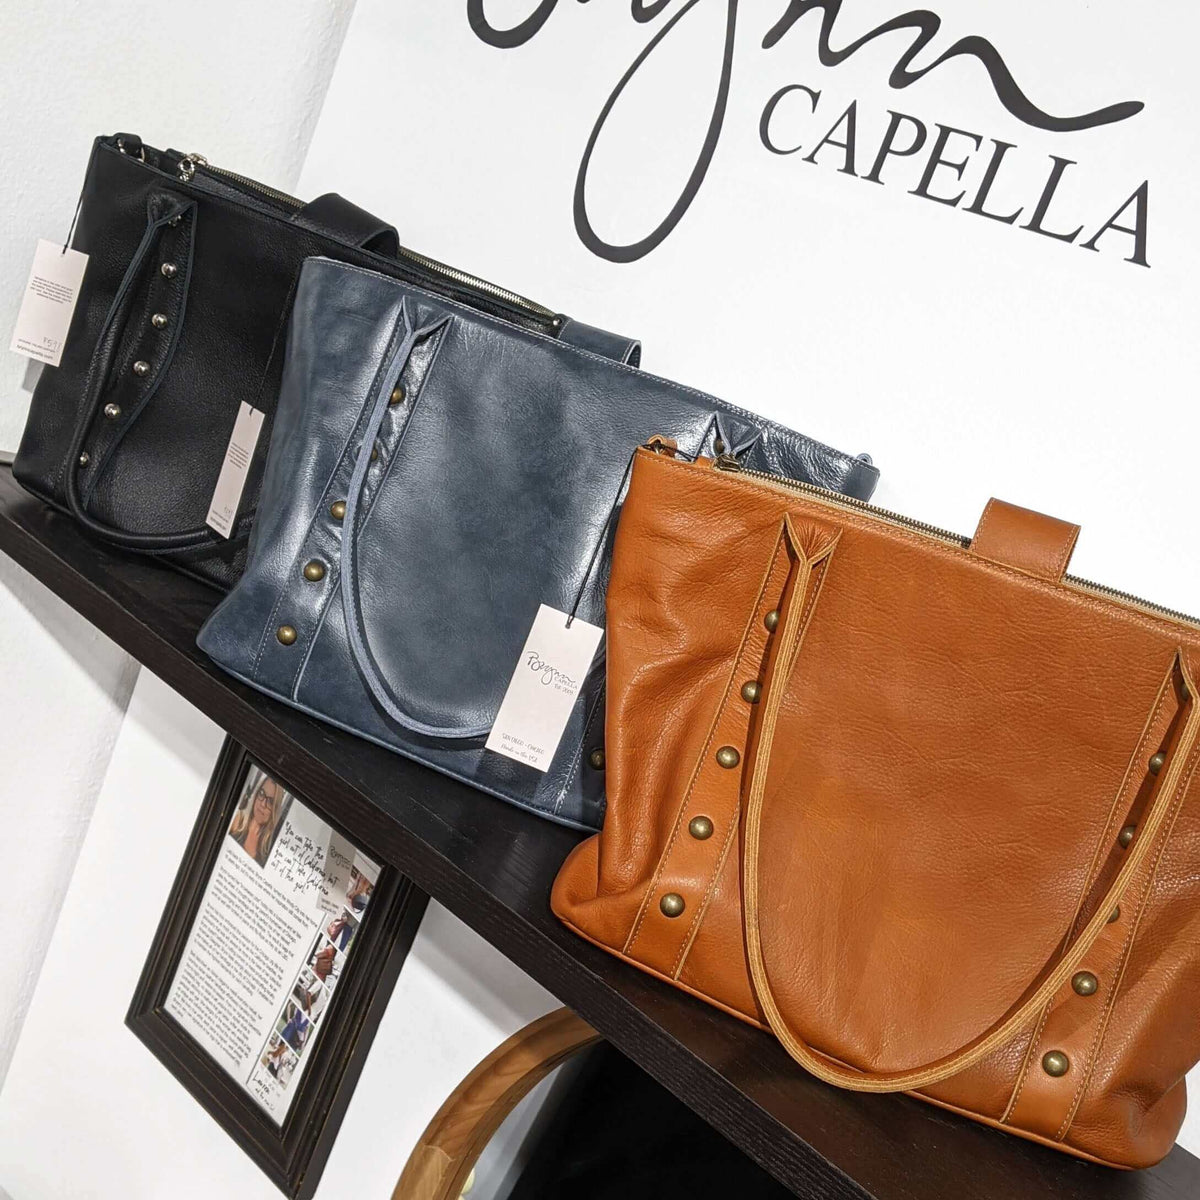 The perfect leather tote bag, available colors, Brynn Capella, made in the usa